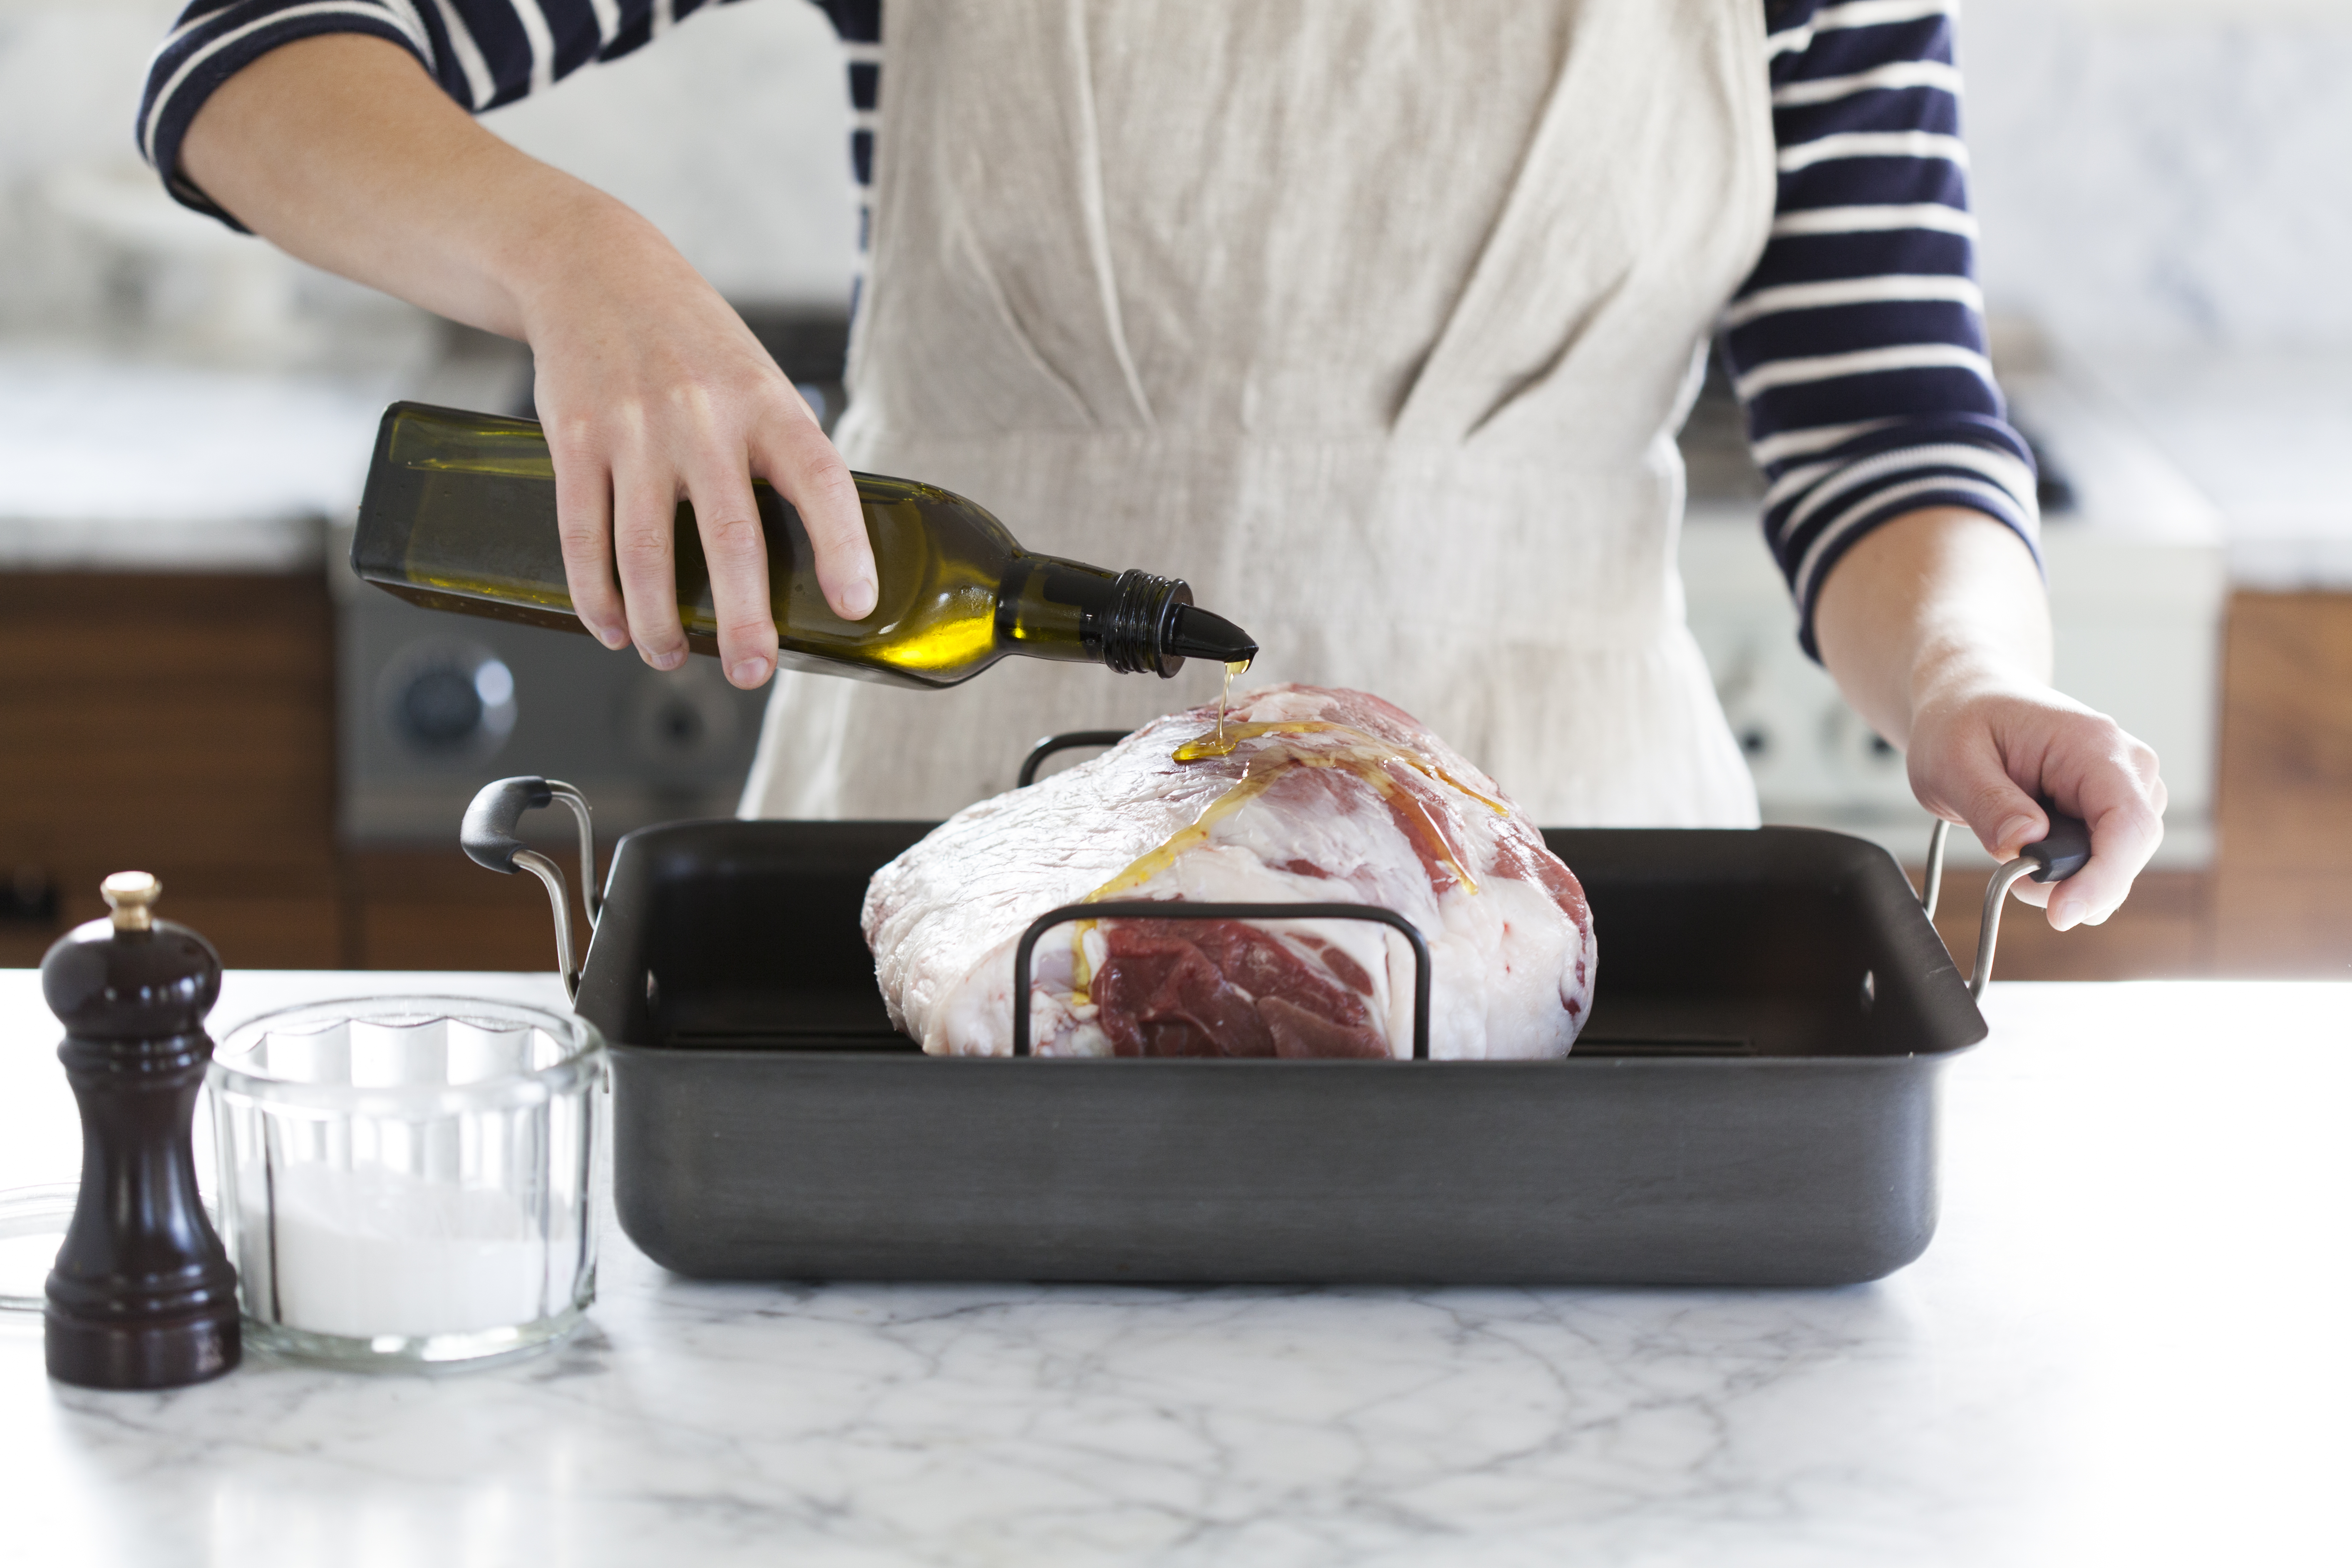 8 Cooking Mistakes That Make You Fat